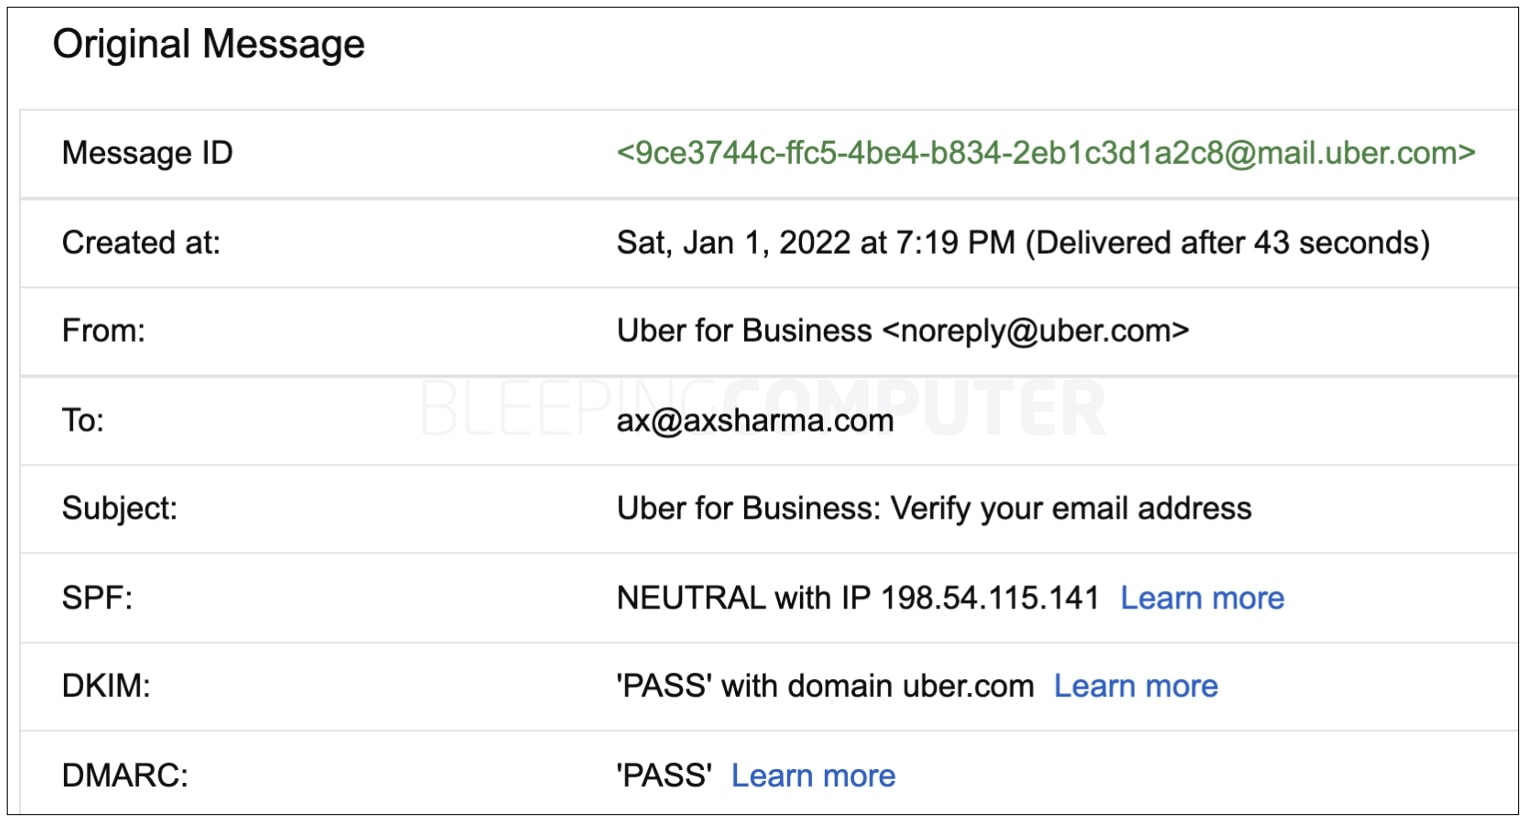 Email sent from Uber passes DKIM and SPF security checks